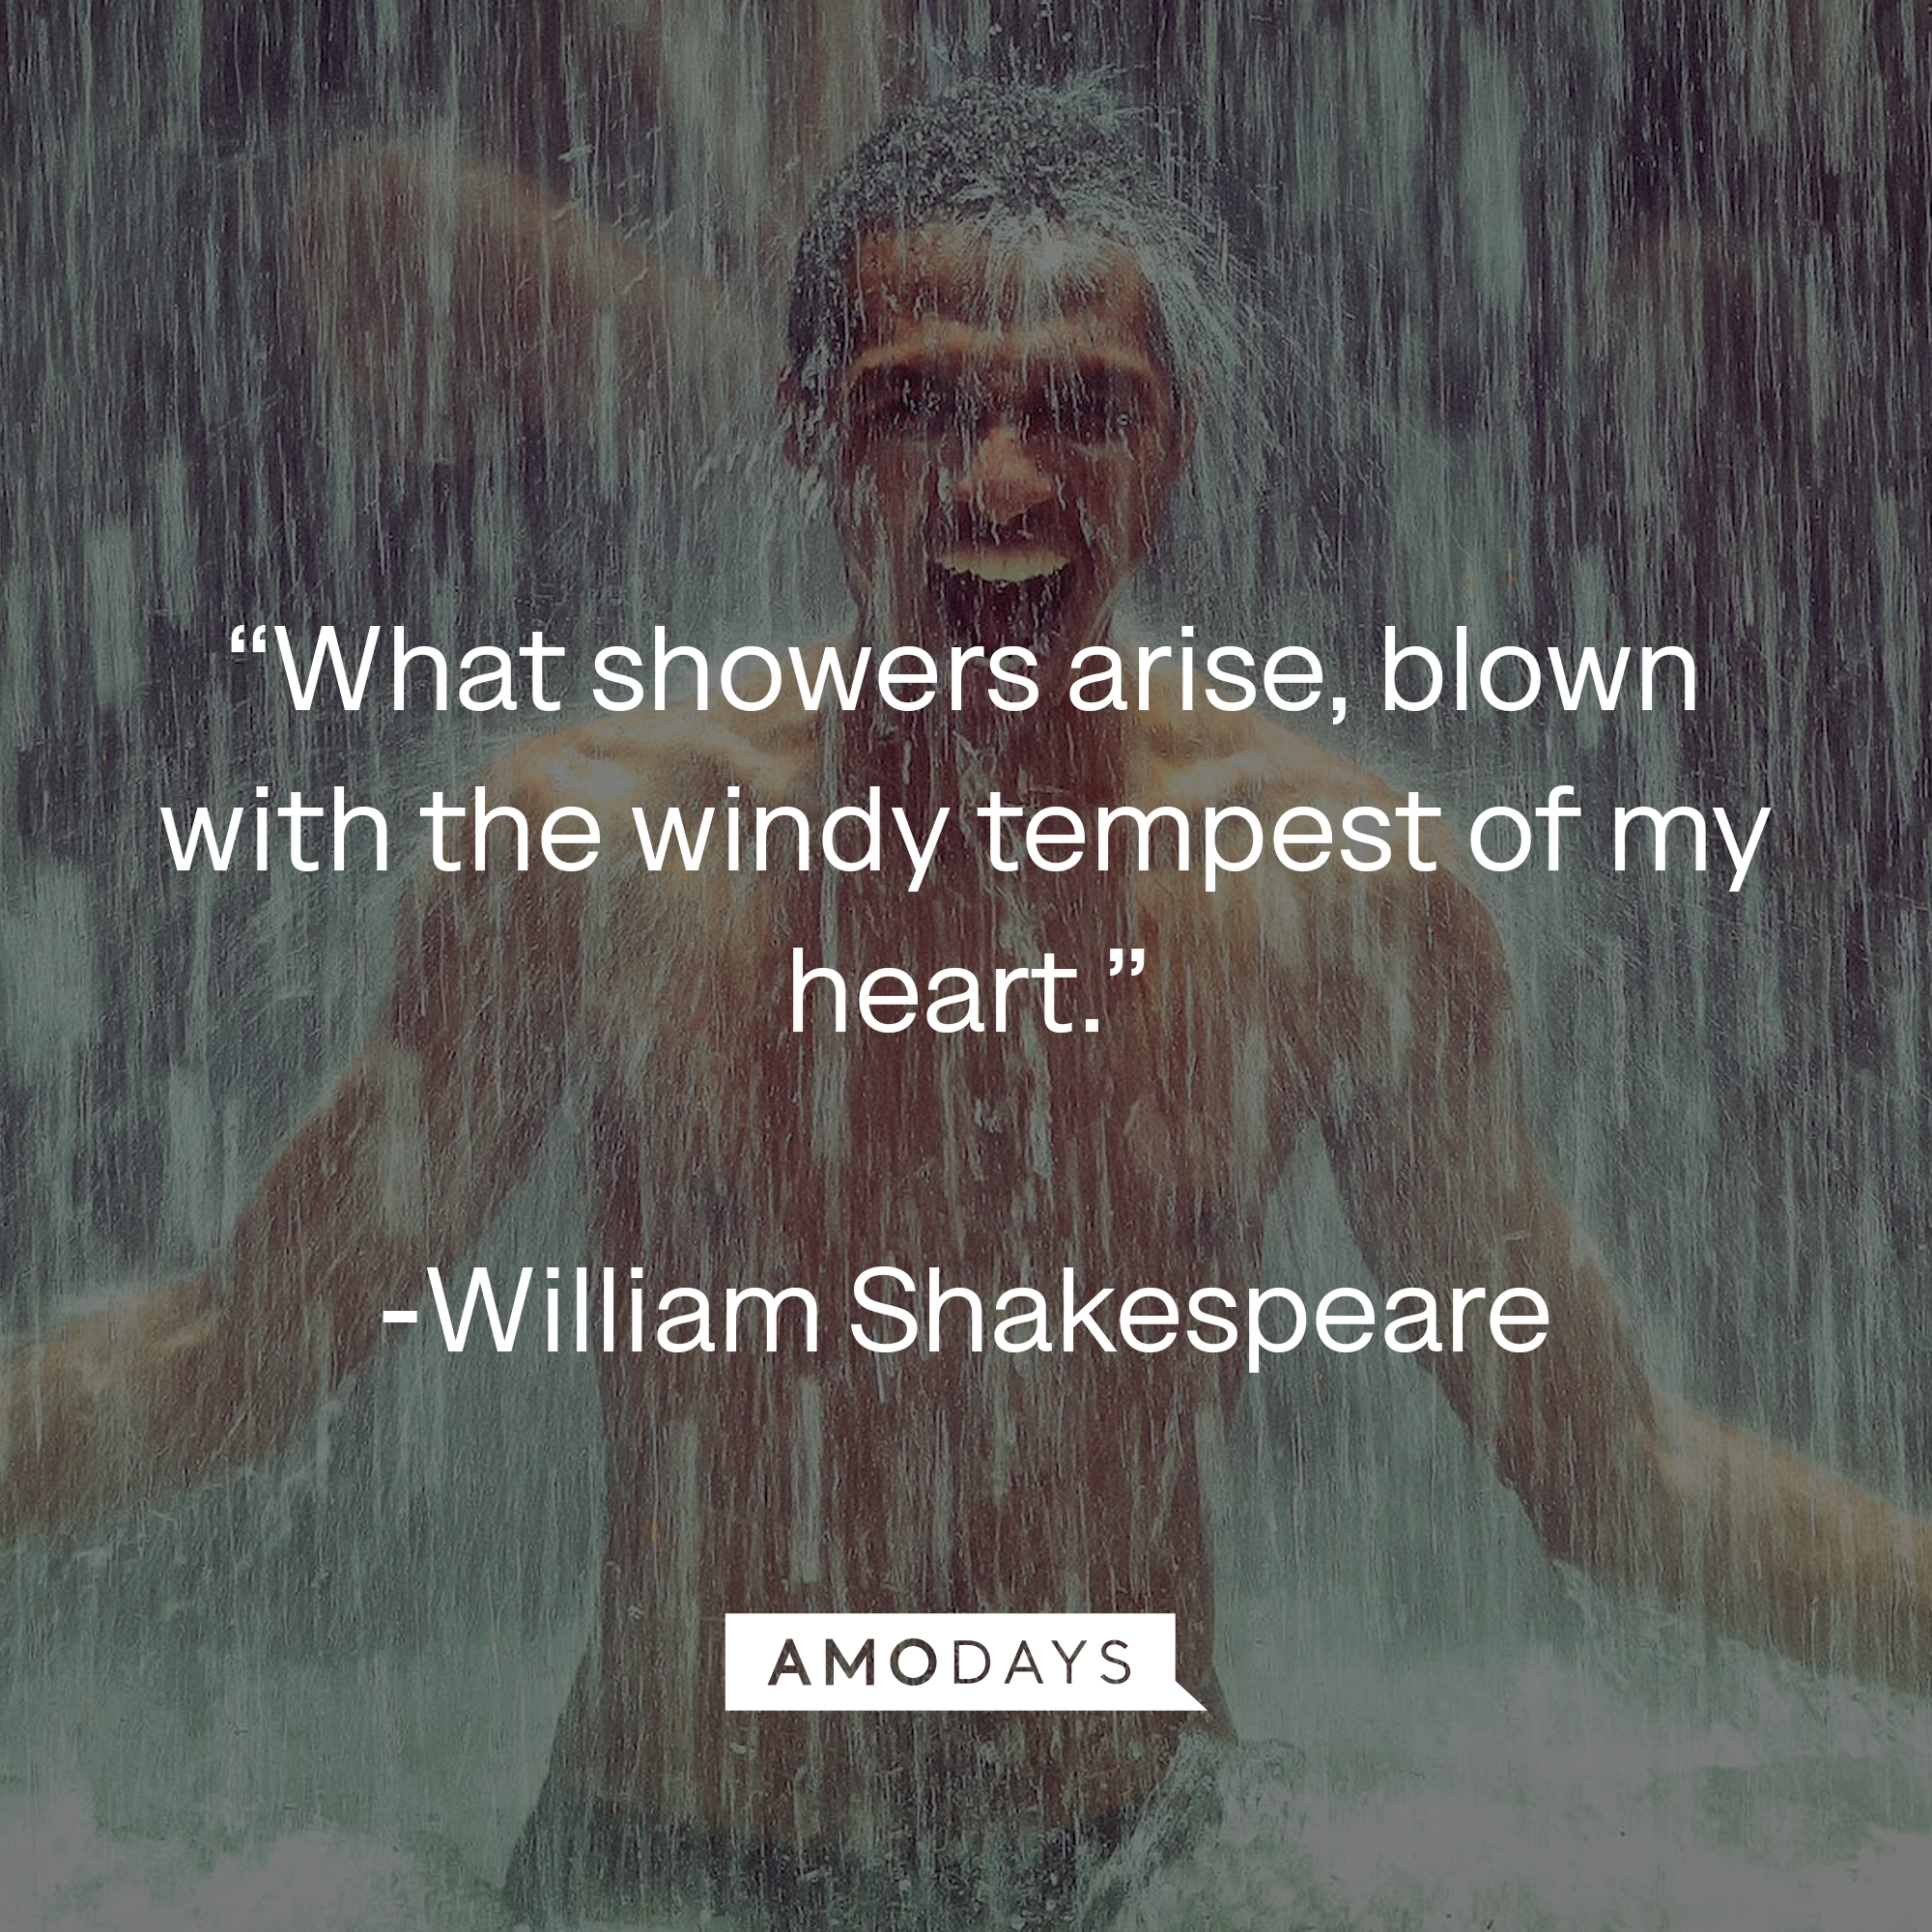 William Shakespeare's quote: "What showers arise, blown with the windy tempest of my heart." | Source: azquotes